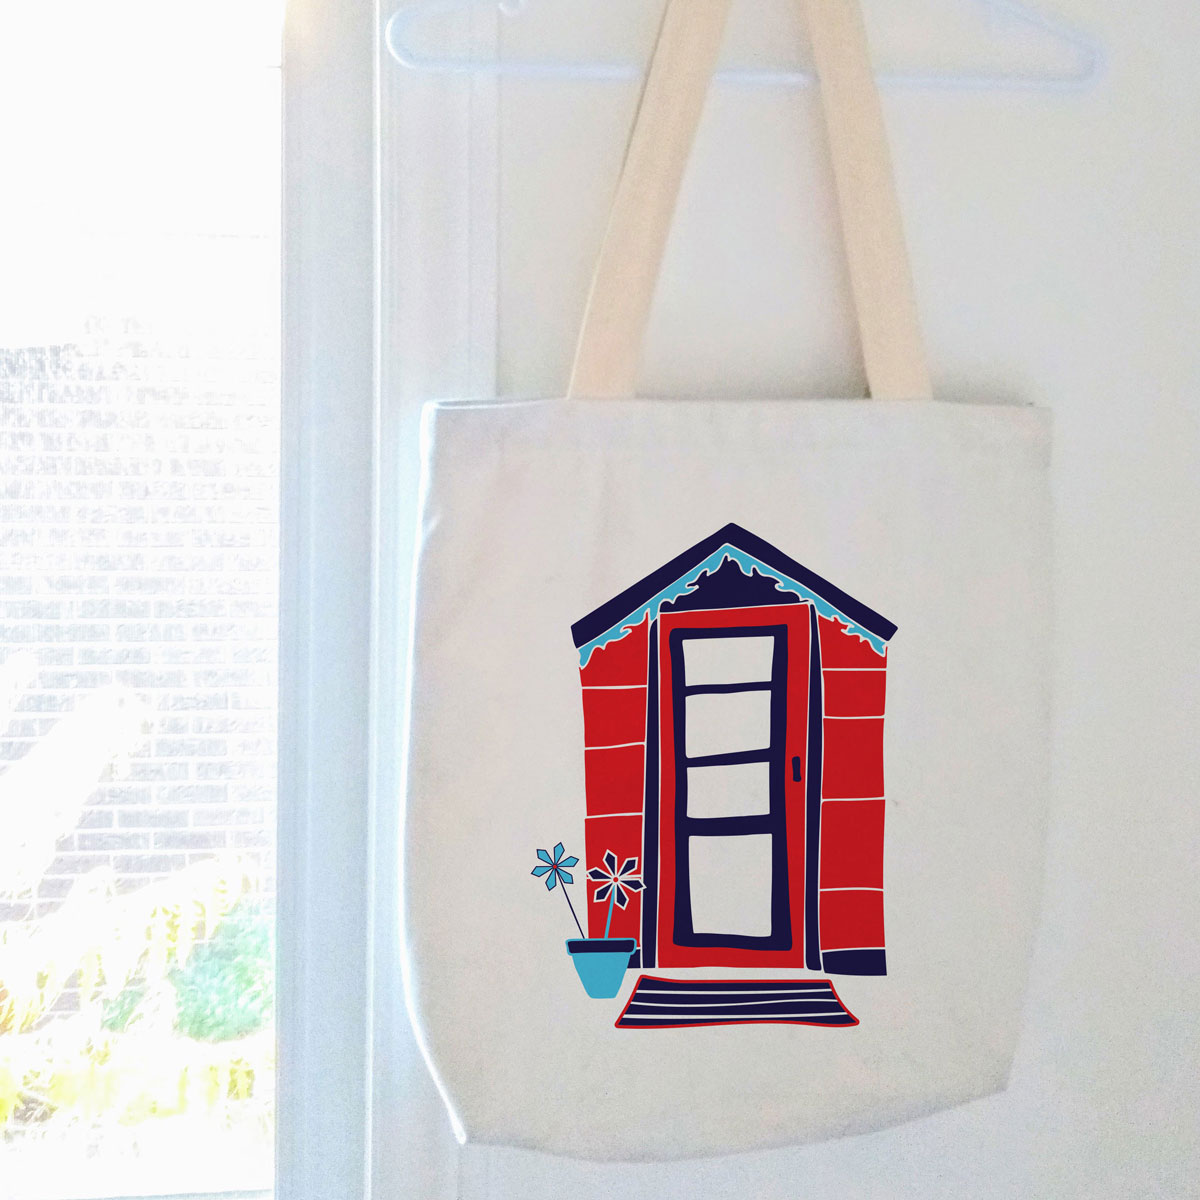 Five Patch Design summer cottage tote